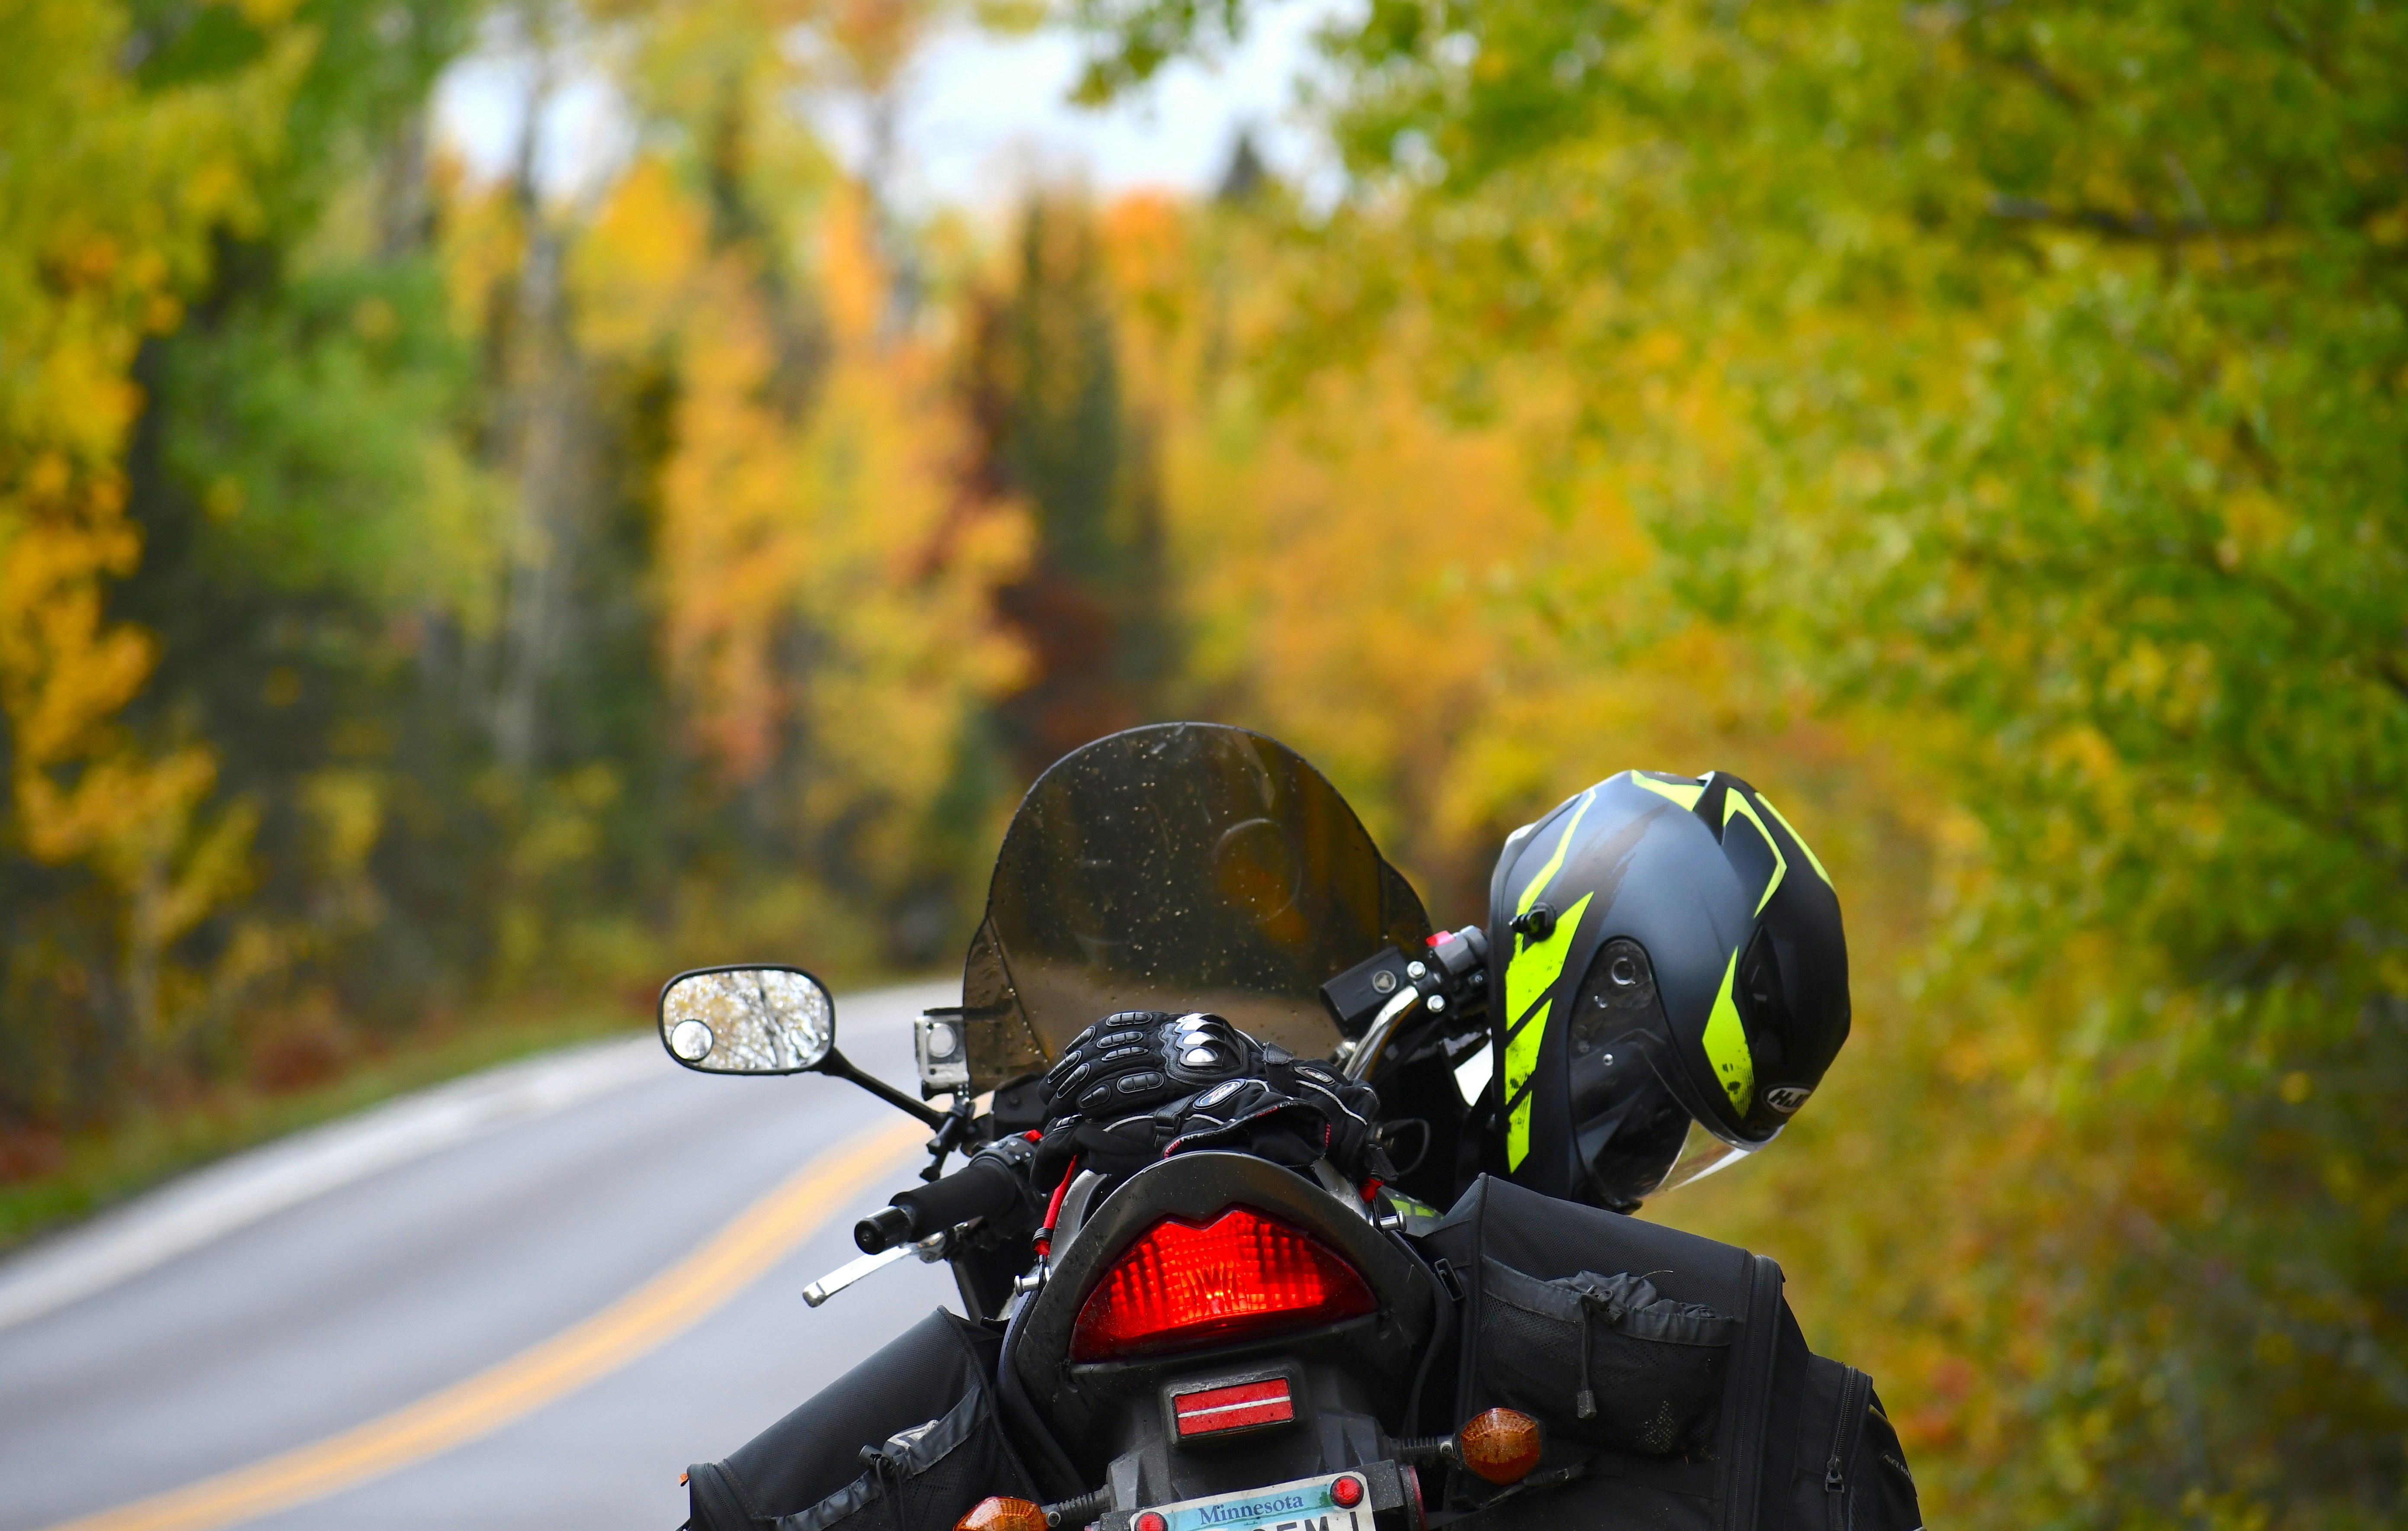 Riding on a fall day, Superior National Forest, Ely, Minnesota, USA.